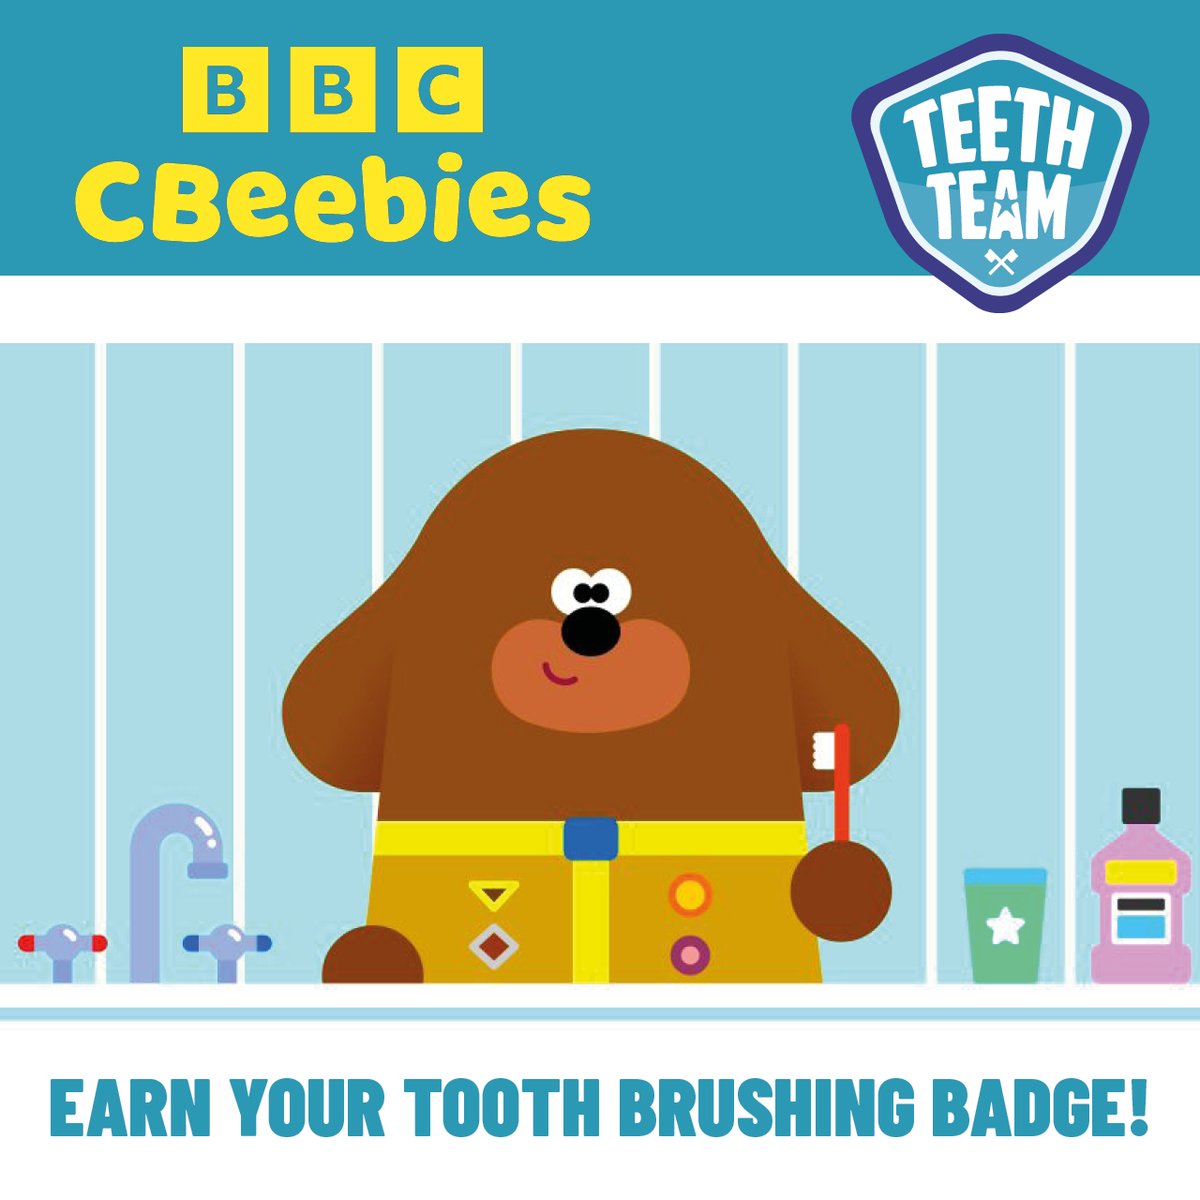 Give children the best start to a lifetime of excellent oral health and teach them why brushing is so important with this interactive CBeebies brushing game. 

Check it out: 
bbc.co.uk/cbeebies/puzzl…

#kidshealth